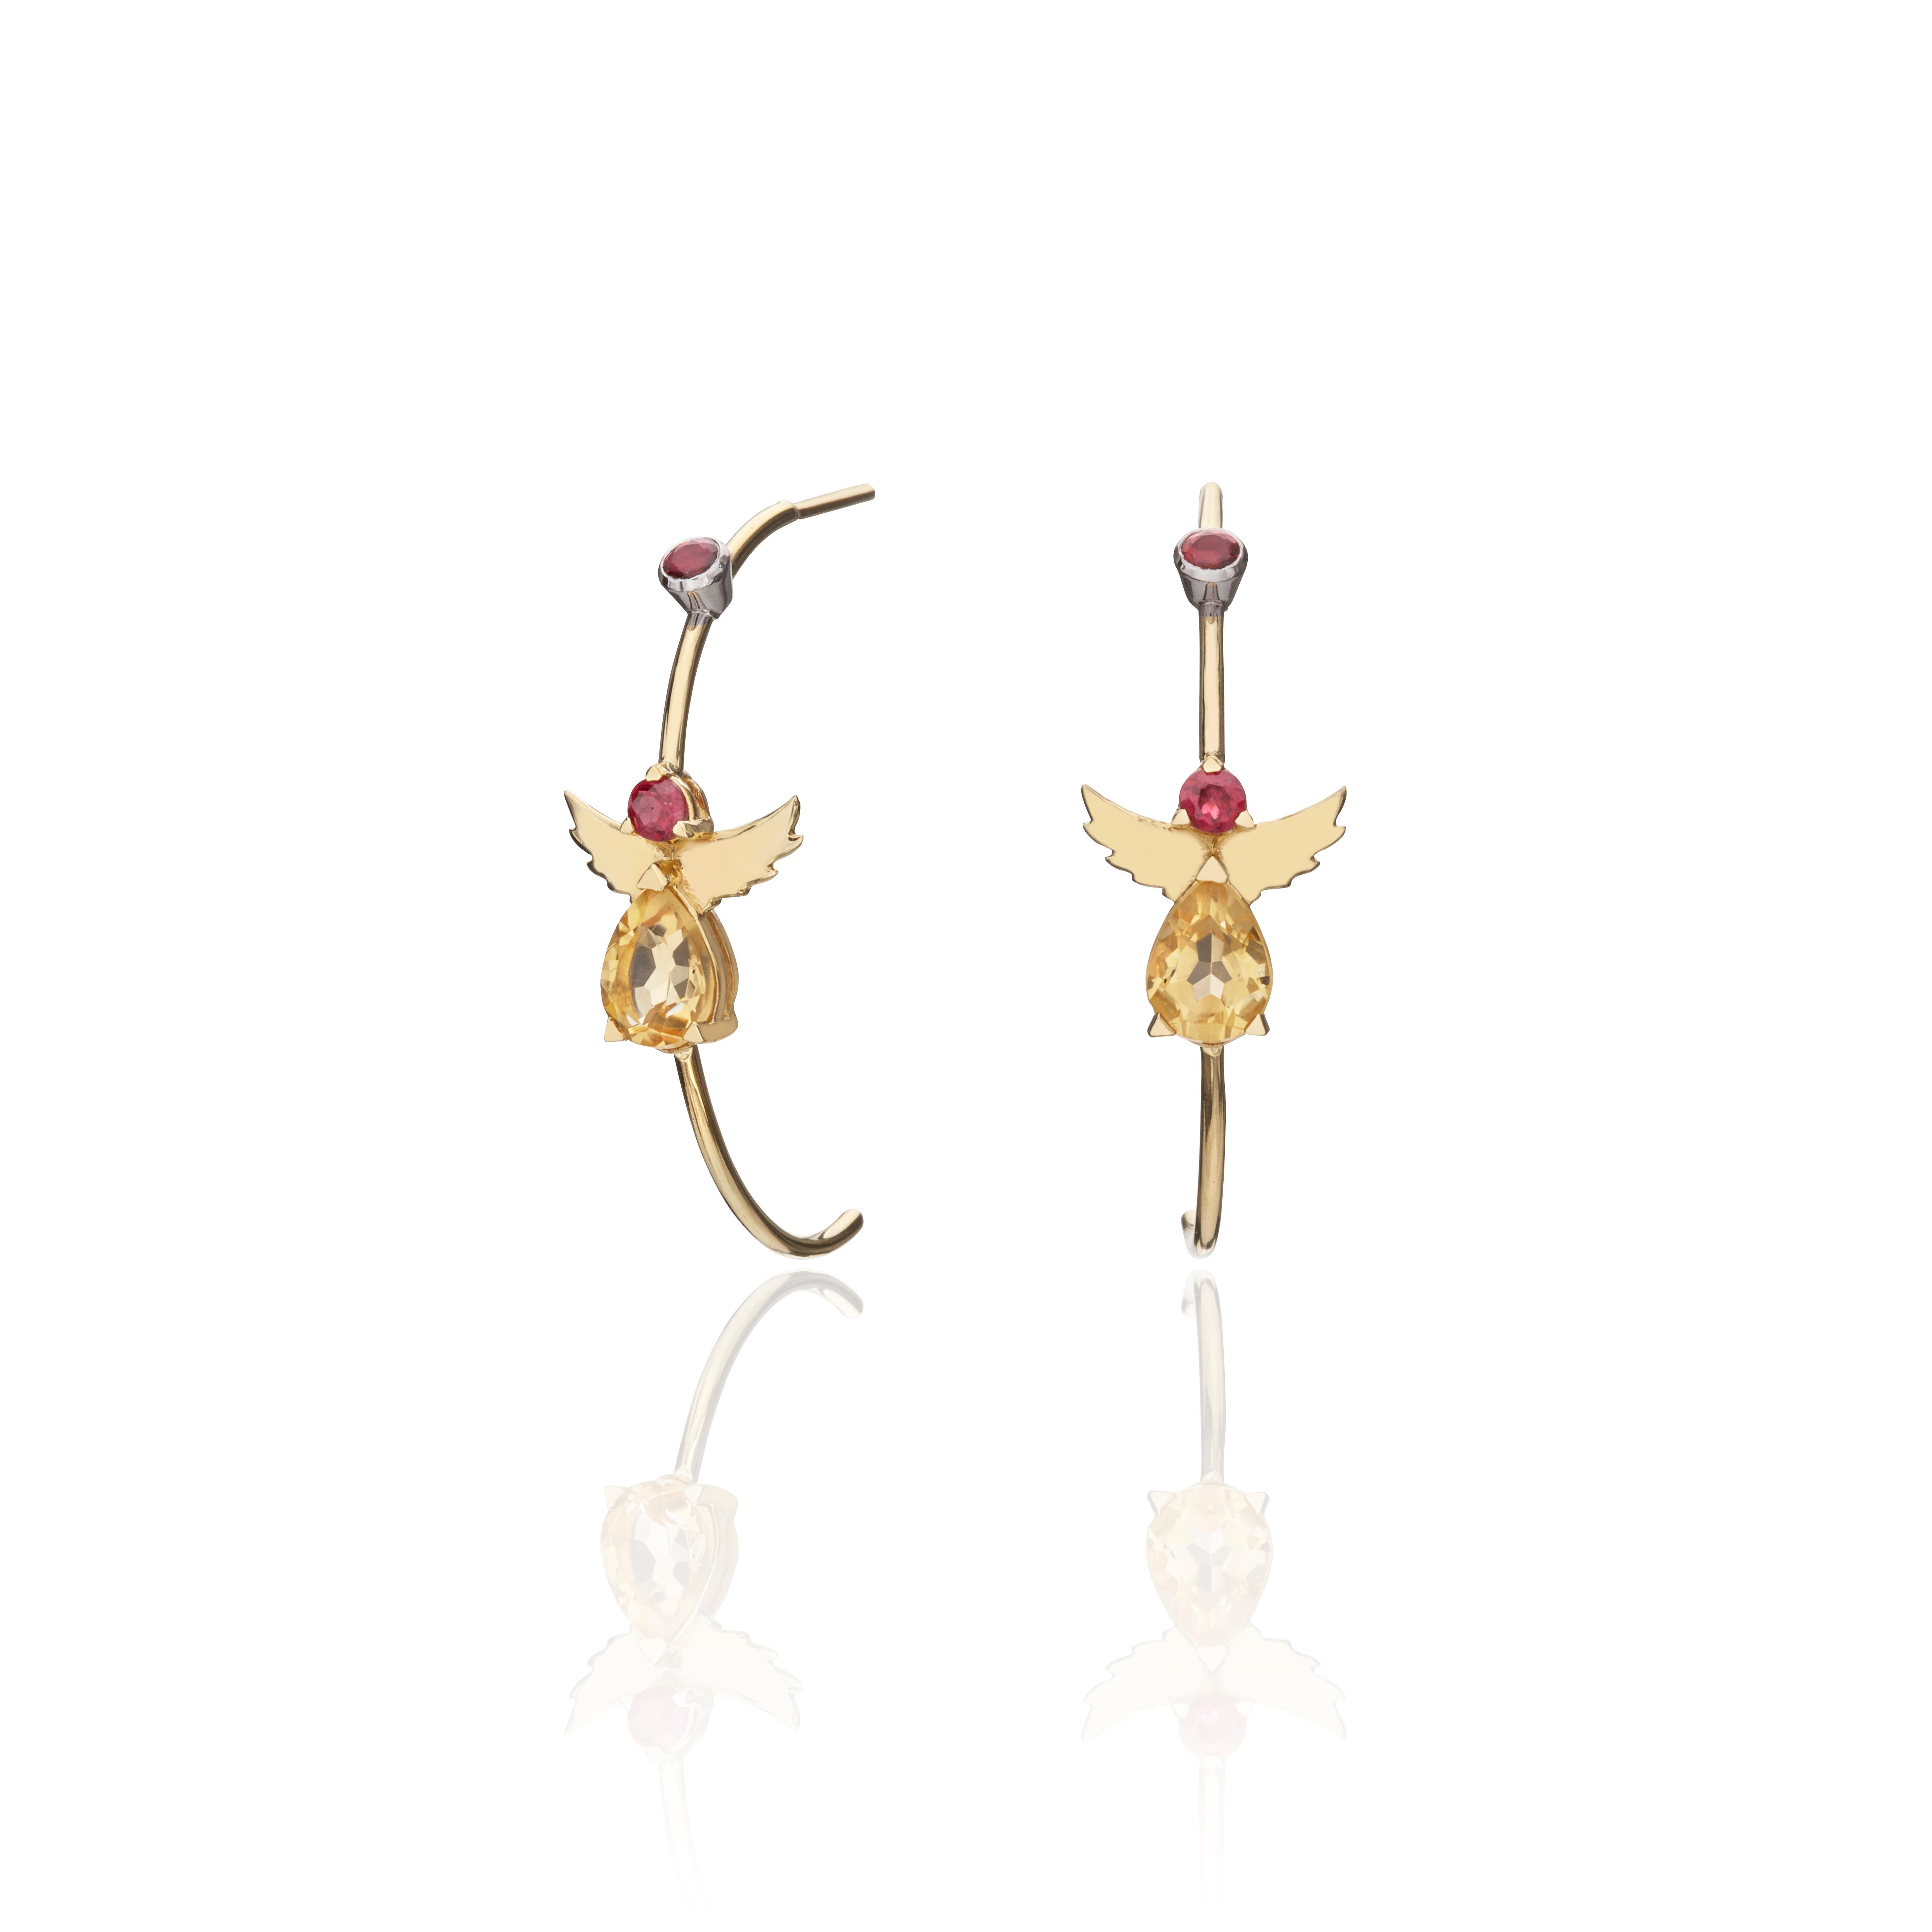 Angel C-Hoop FIne Earrings in 18Kt Yellow Gold with yellow Pear Citrine and Red round Tourmaline in stock.
The Angels C-Hoop are made by hand and they are very easywear for every day for any occasion that adds style and a special sense to your